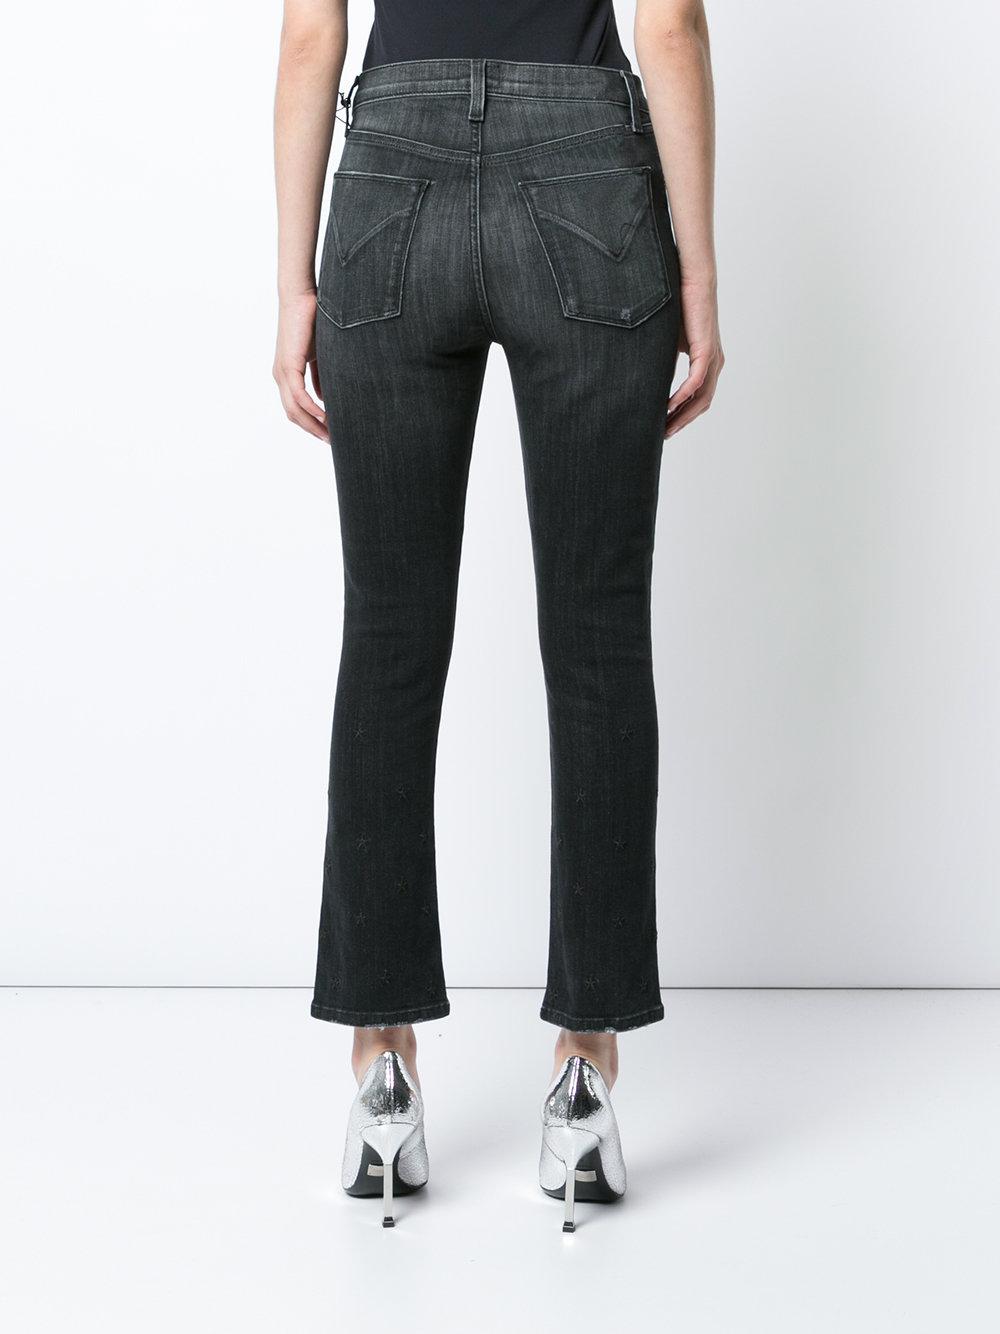 Hudson Jeans Denim Kick Flare High Rise Cropped Jeans in Black - Lyst